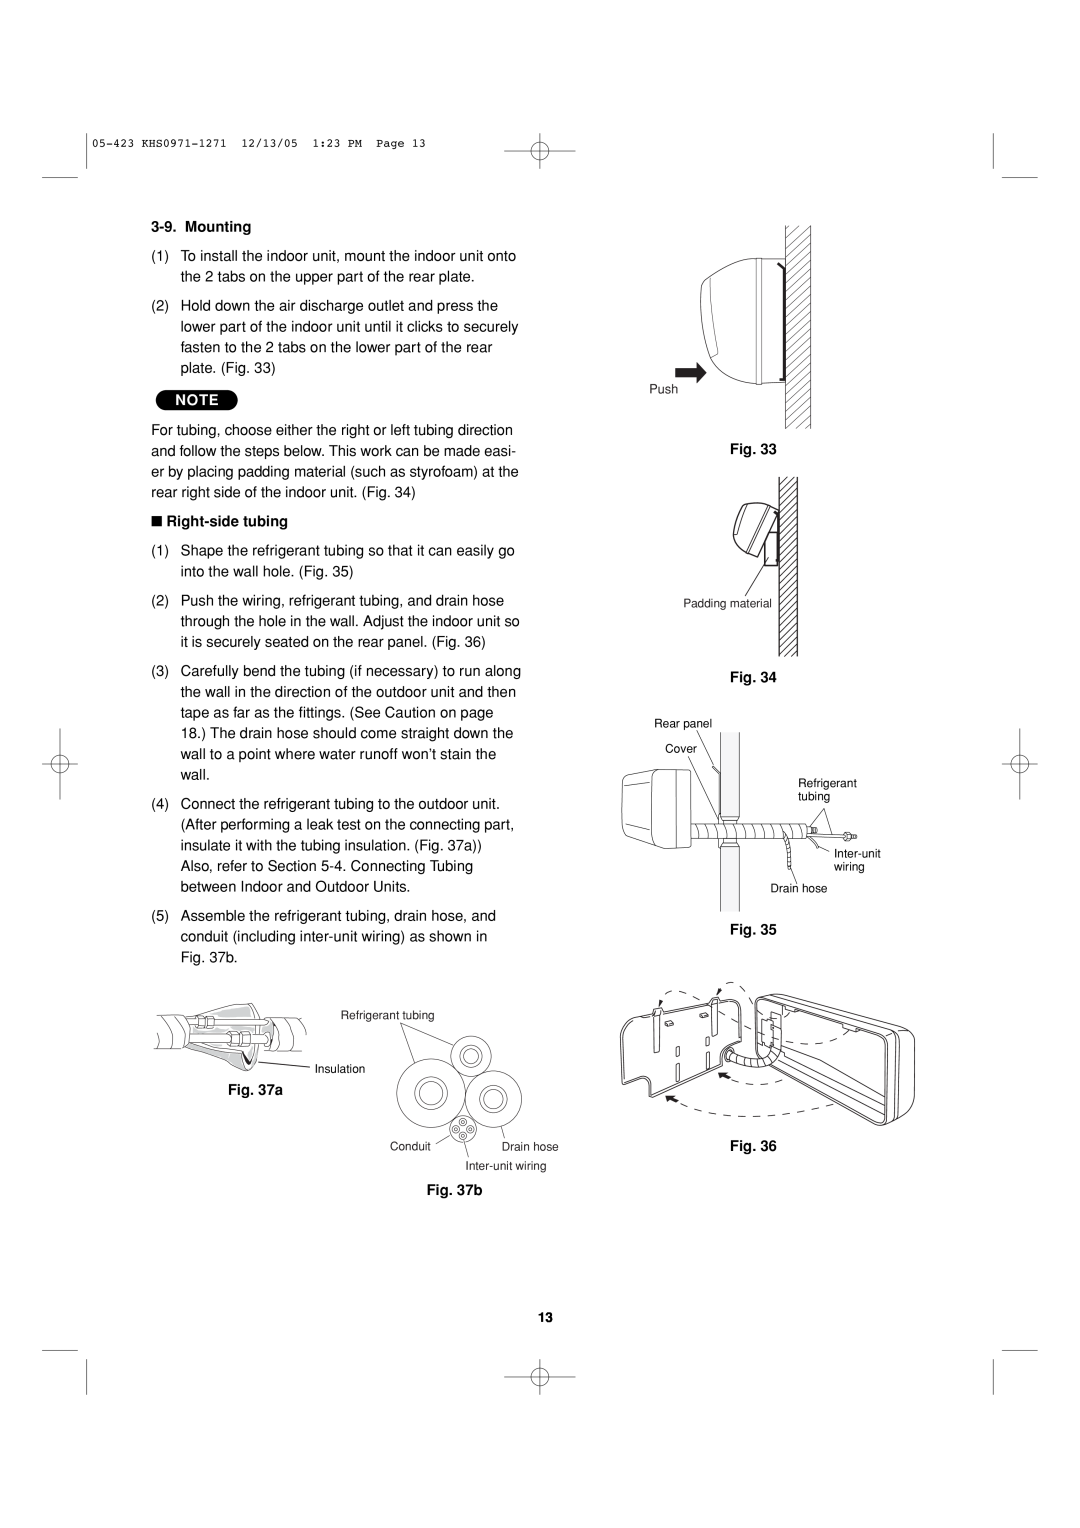 Sanyo 8.53E+13 installation instructions Mounting, Right-sidetubing, Fig. Fig, Push 